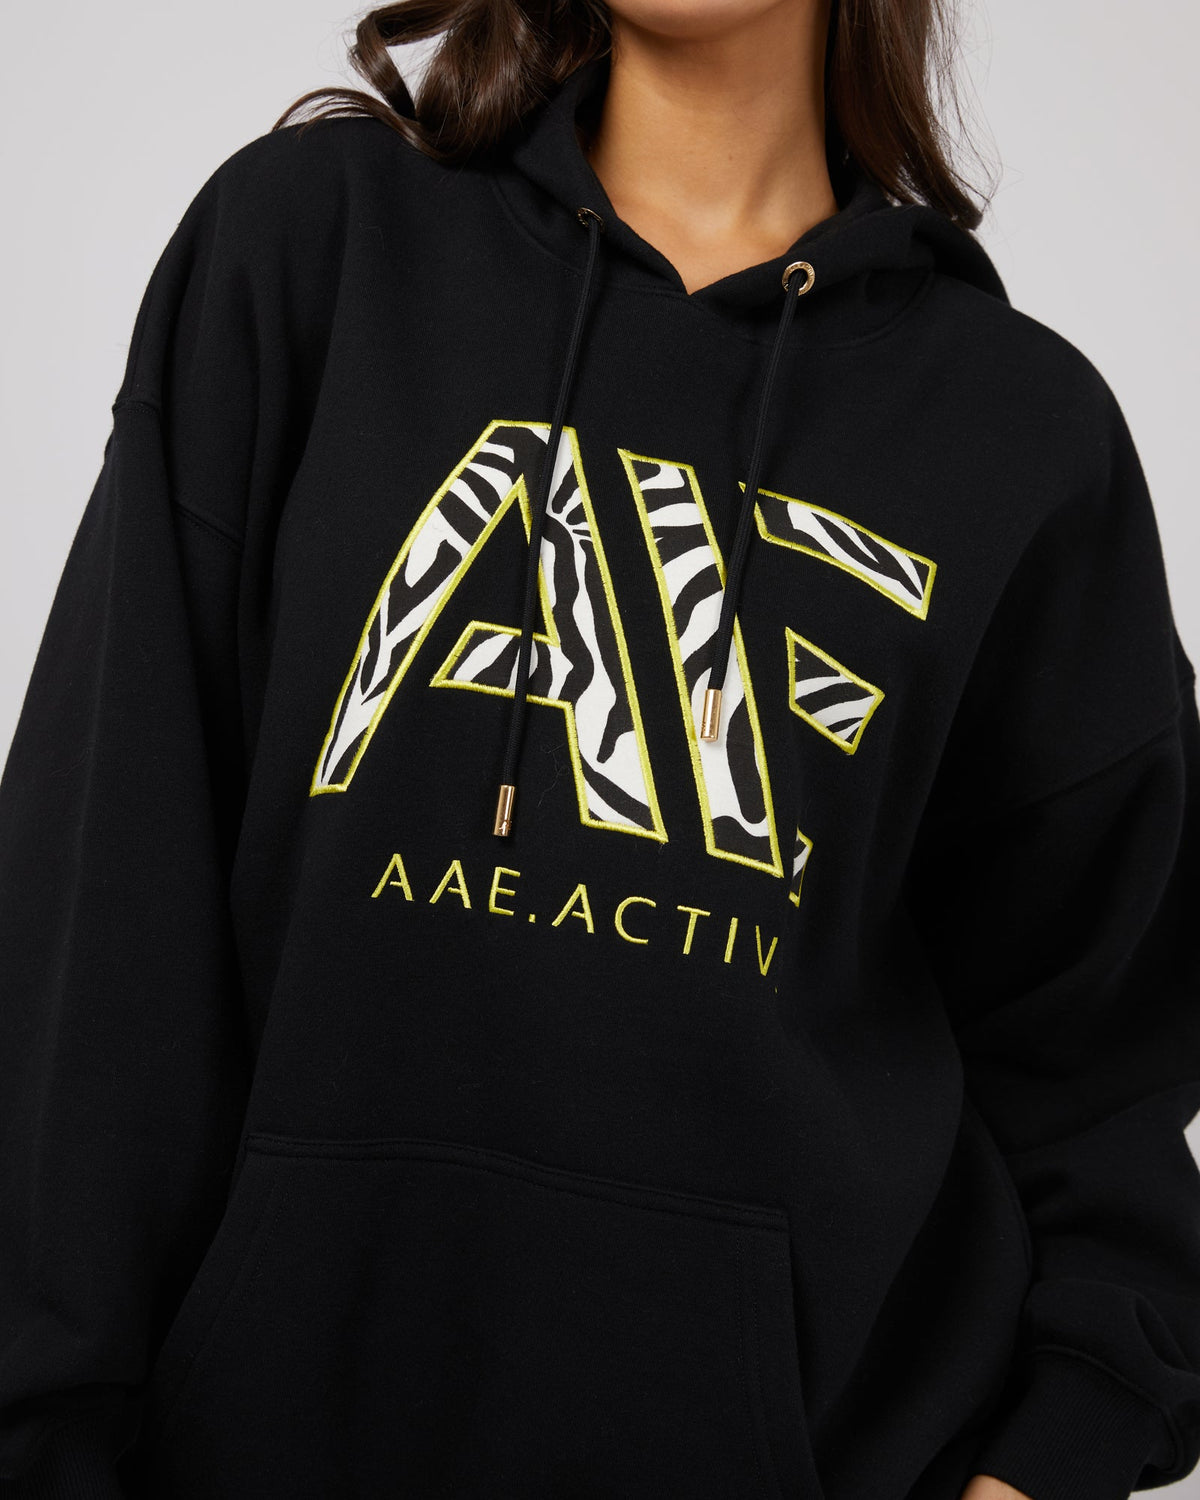 All About Eve-Parker Active Hoodie Black-Edge Clothing